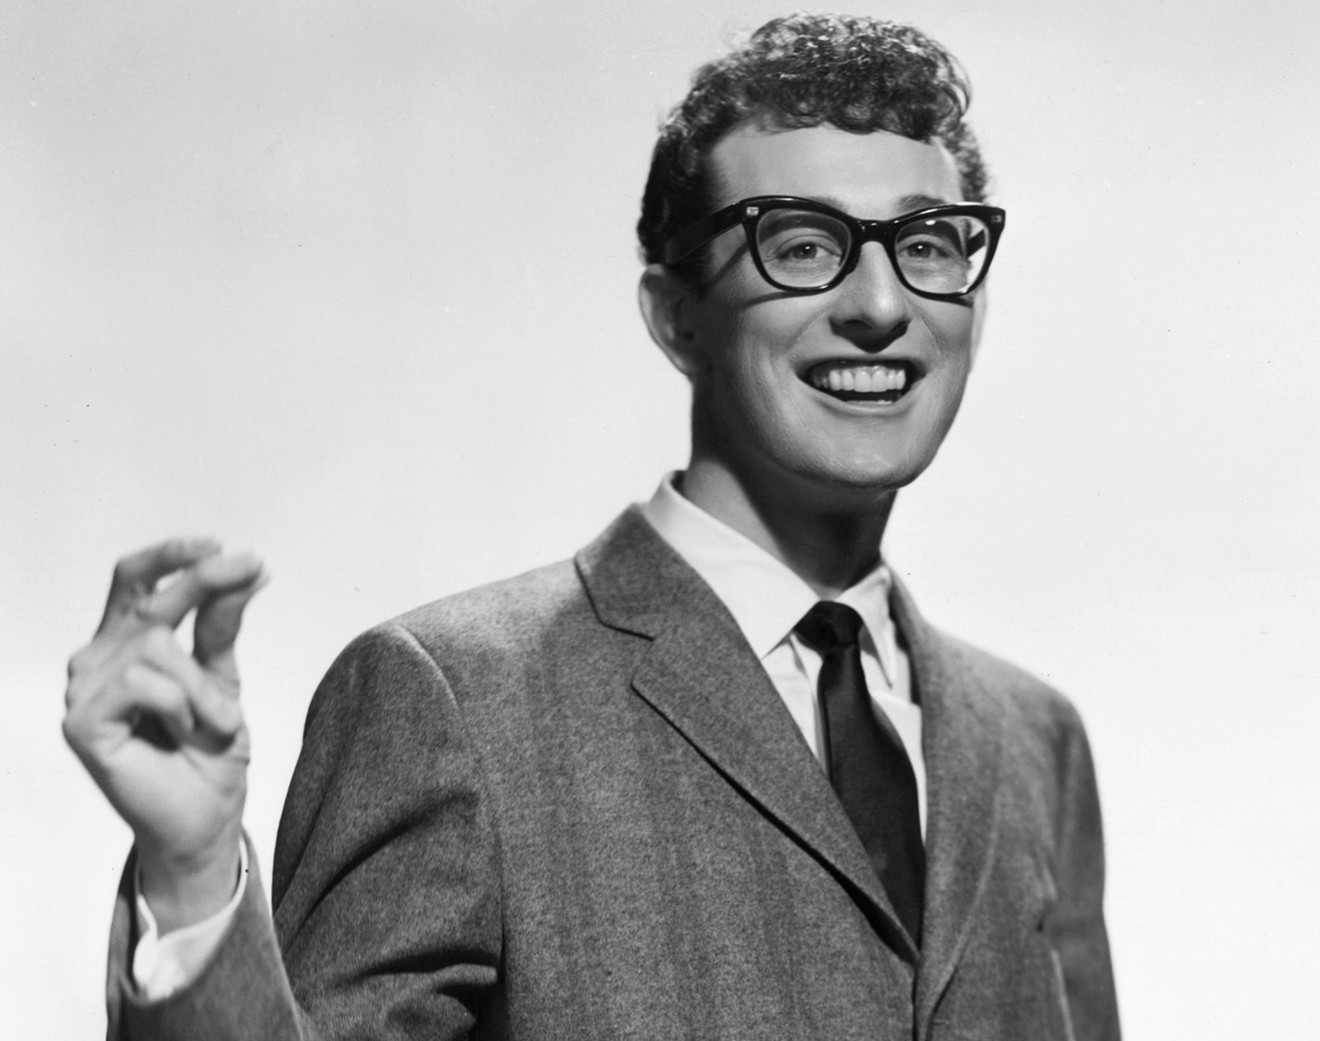 Buddy Holly, seen here in a promo picture for Brunswick Records, was just 22 when he died 62 years ago today.